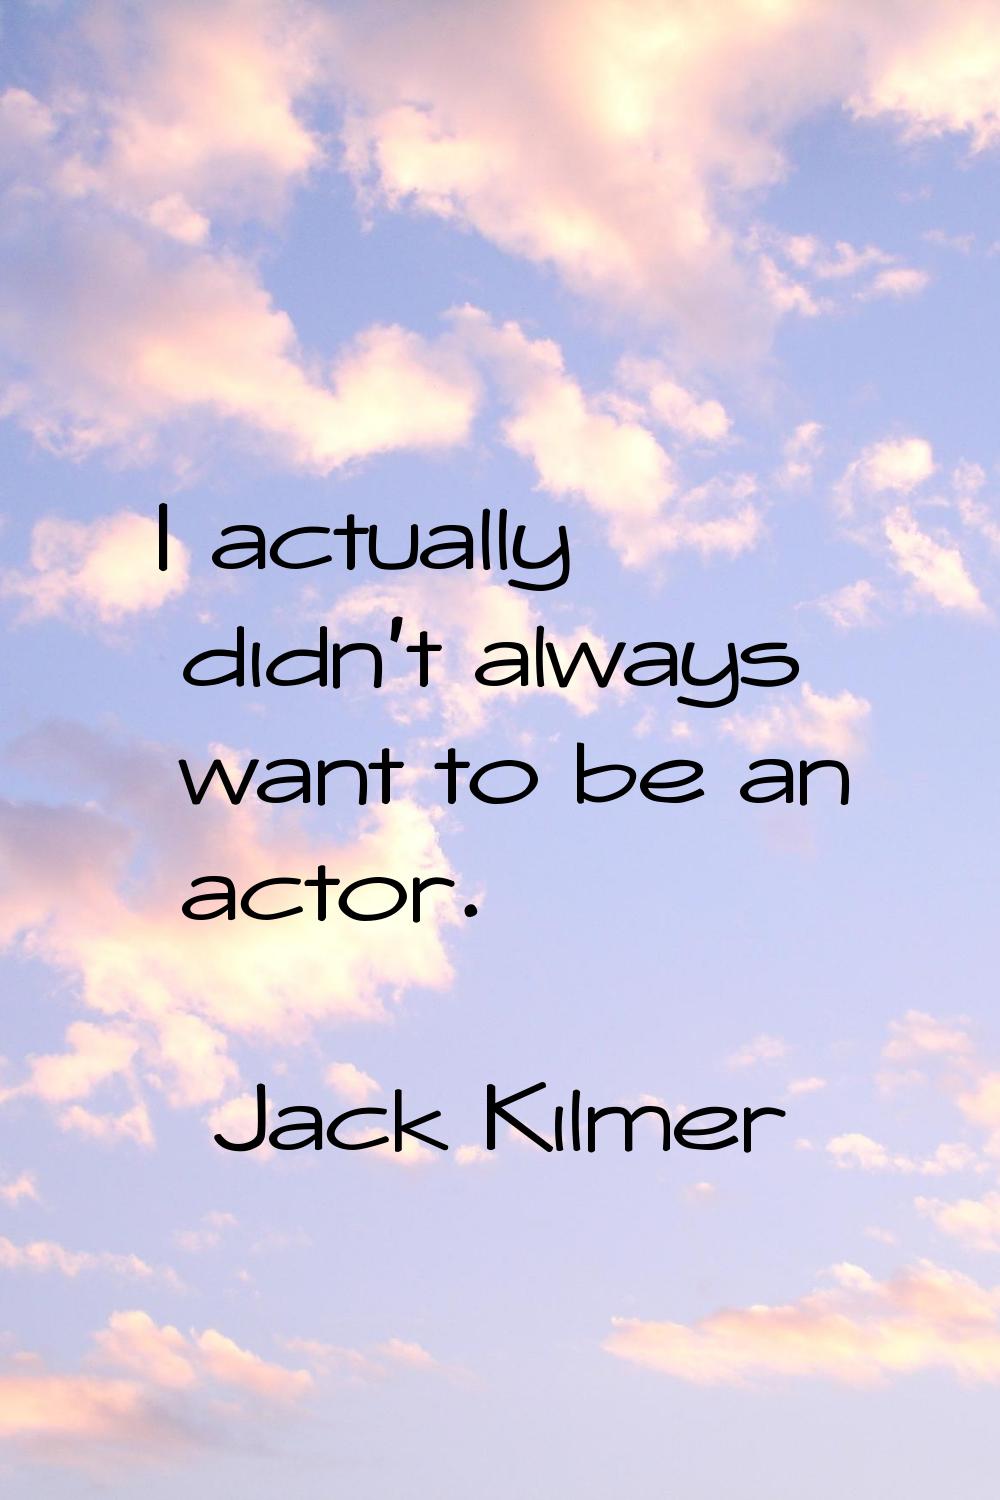 I actually didn't always want to be an actor.